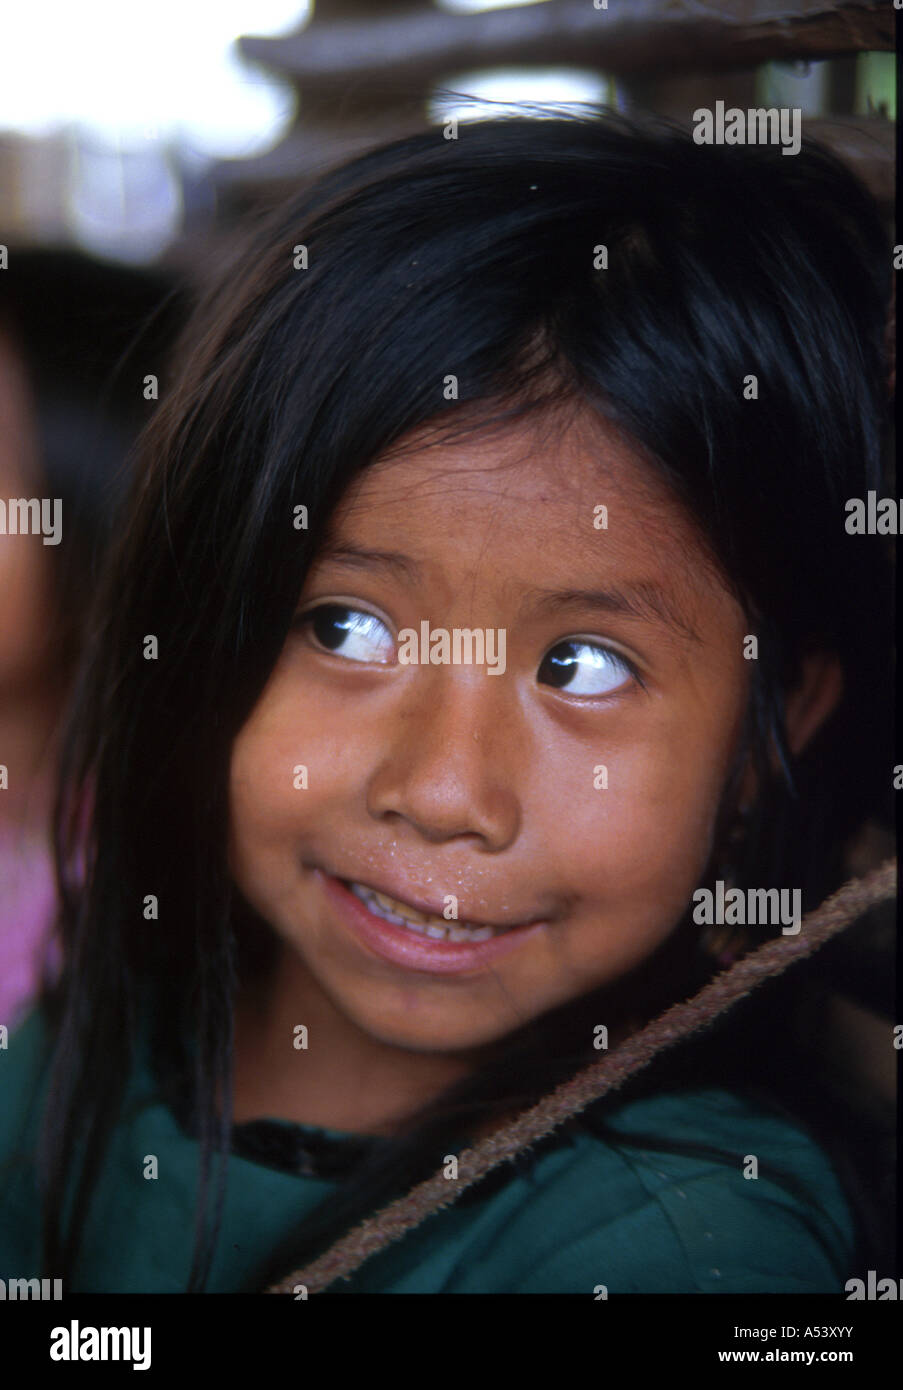 Painet ha2301 5123 guatemala children girl san ines country developing nation less economically developed culture emerging Stock Photo